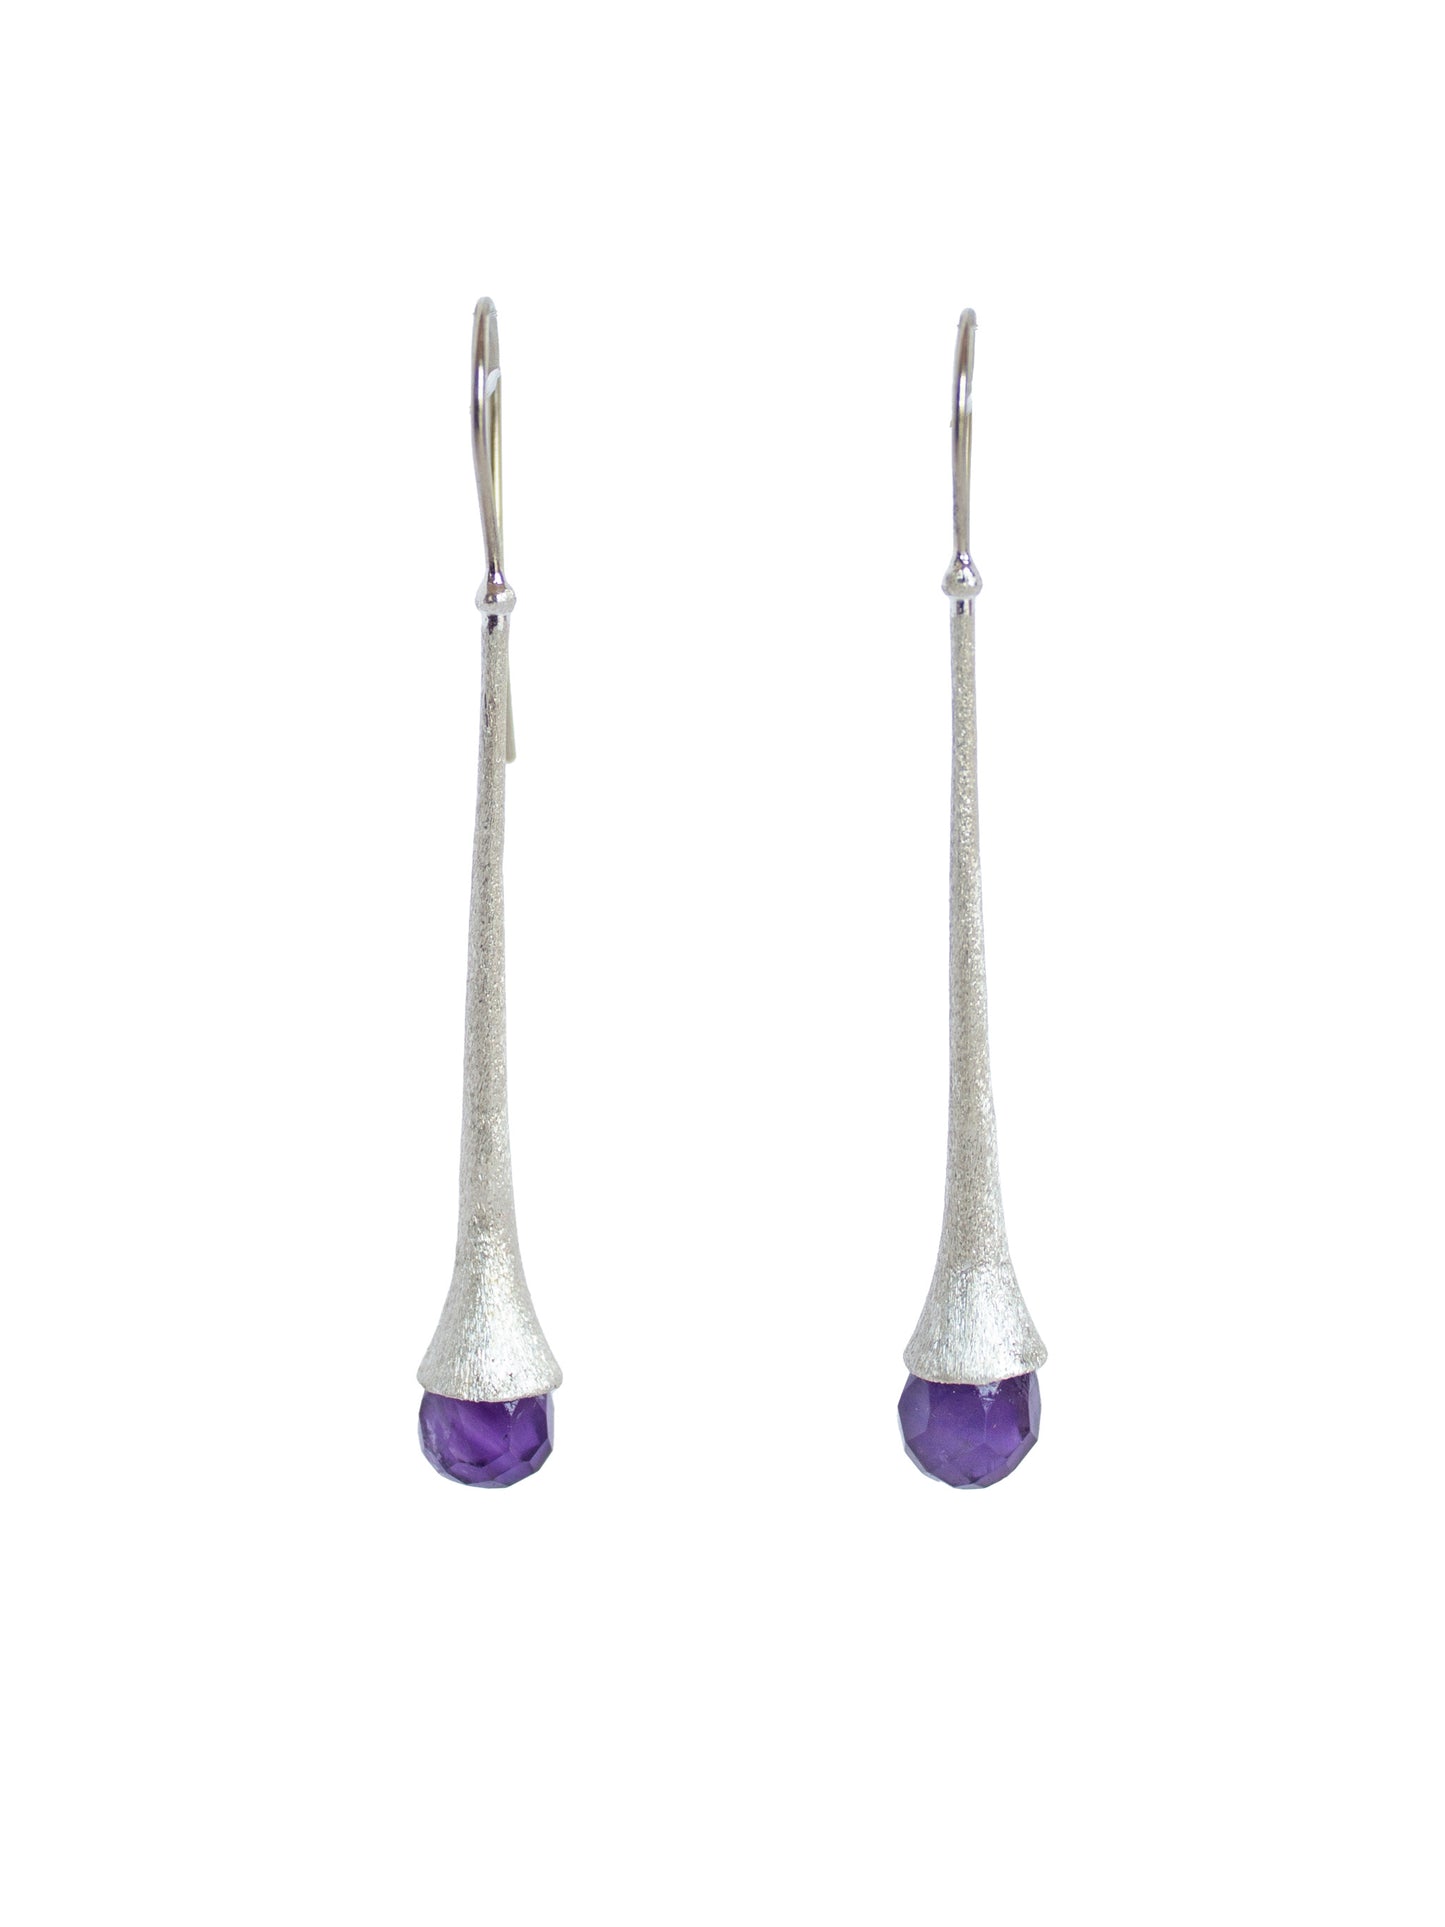 Lean and chic silver earring with a briolette cut amethyst gemstone